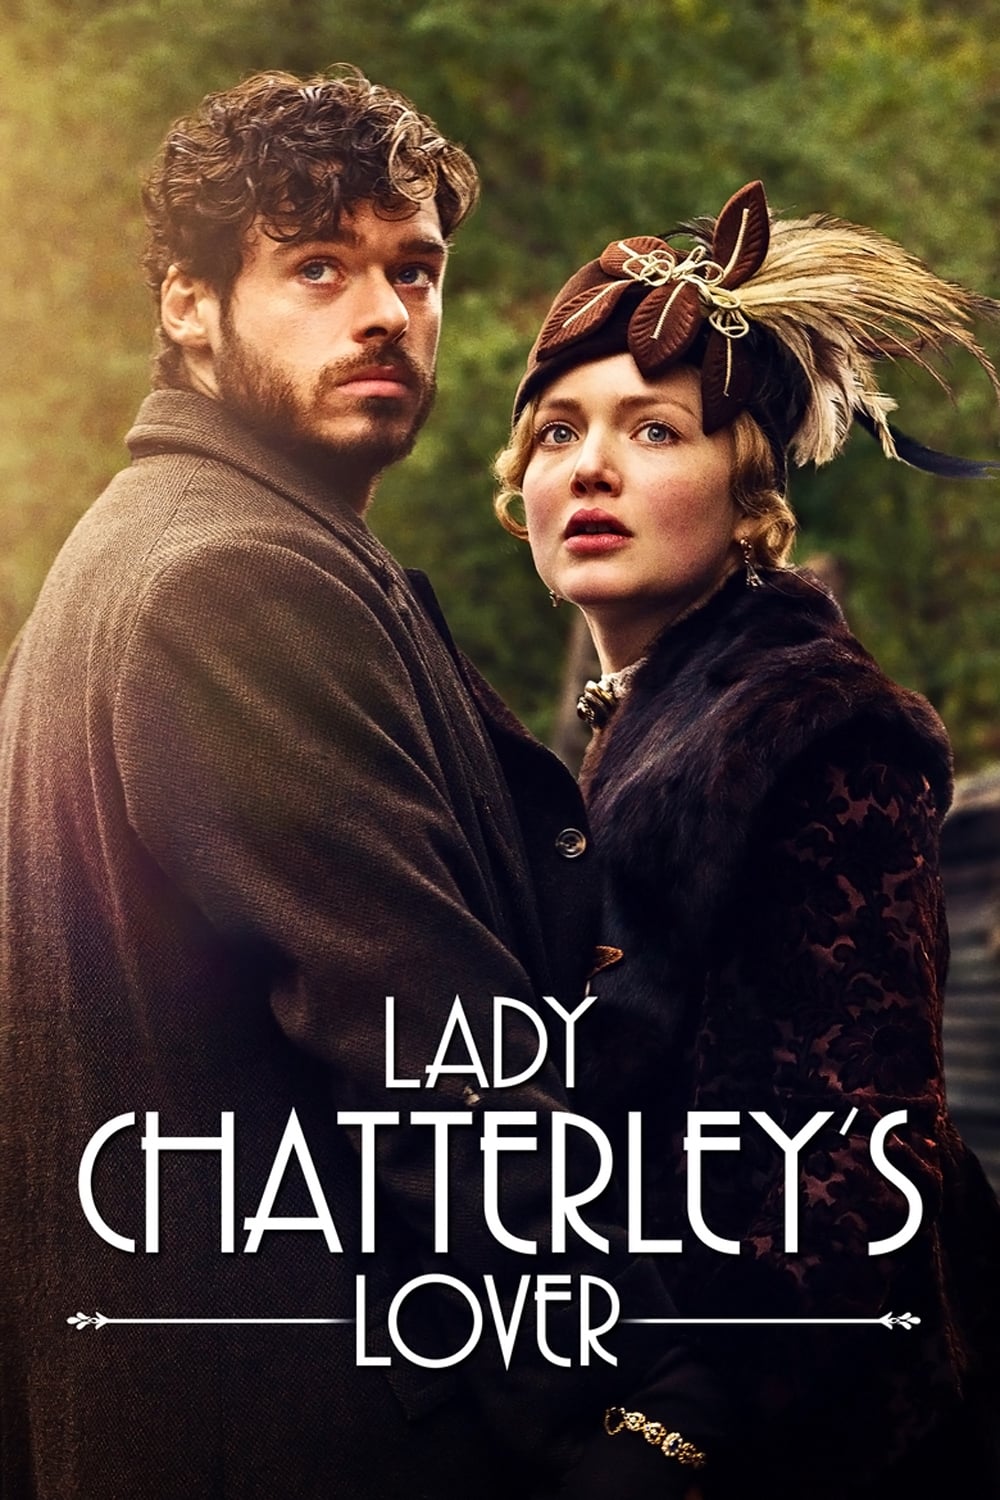 lady chatterley's lover movie review